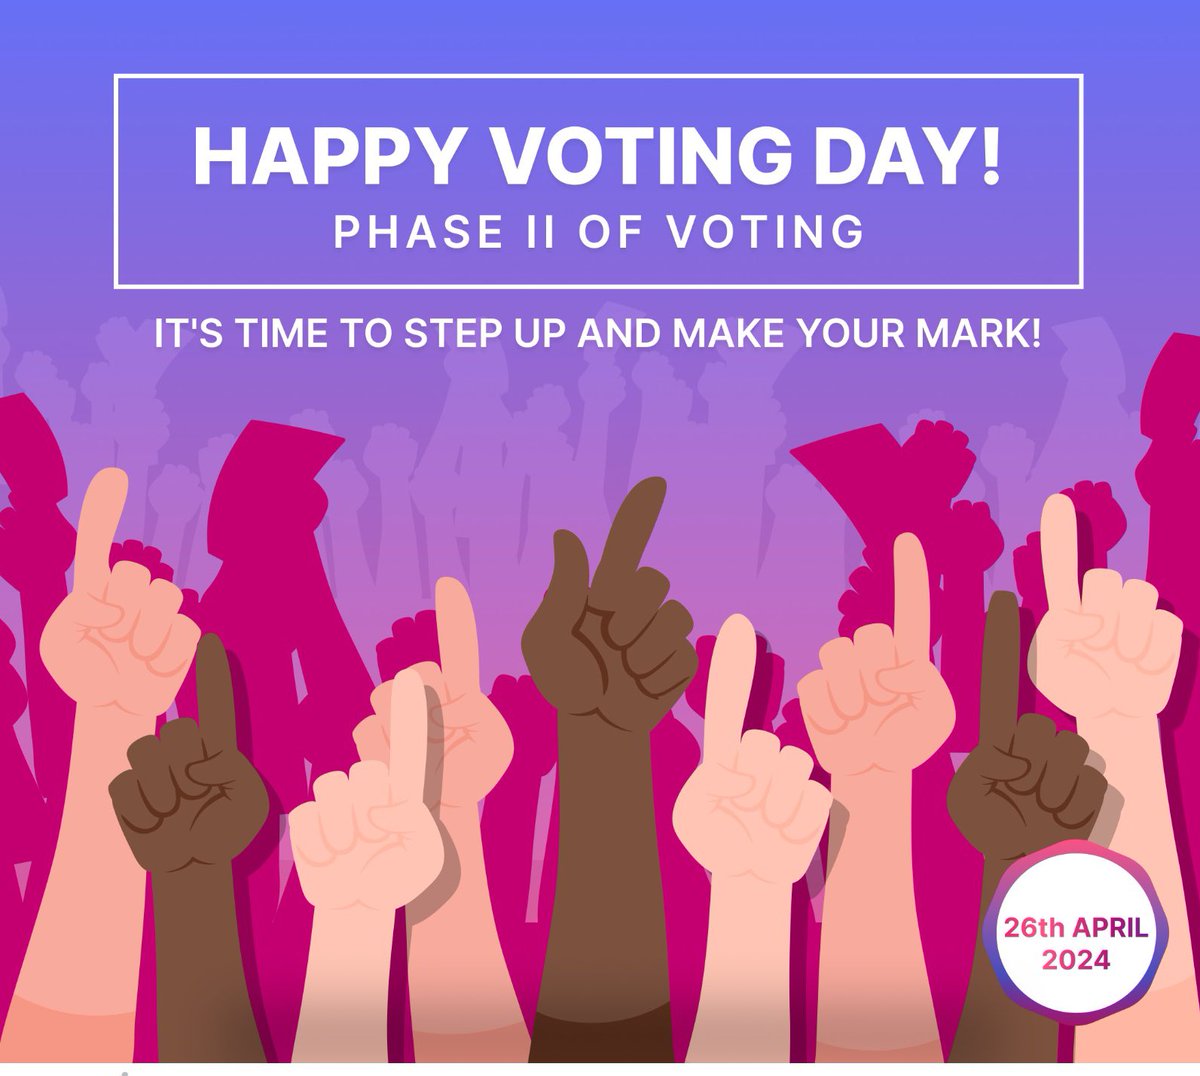 Happy Voting Day! ✨#Phase2 #GeneralElections2024 Head to the polls today and be a part of shaping democracy 🙌 #YouAreTheOne #ChunavKaParv #DeshkaGarv #ECI #Elections2024